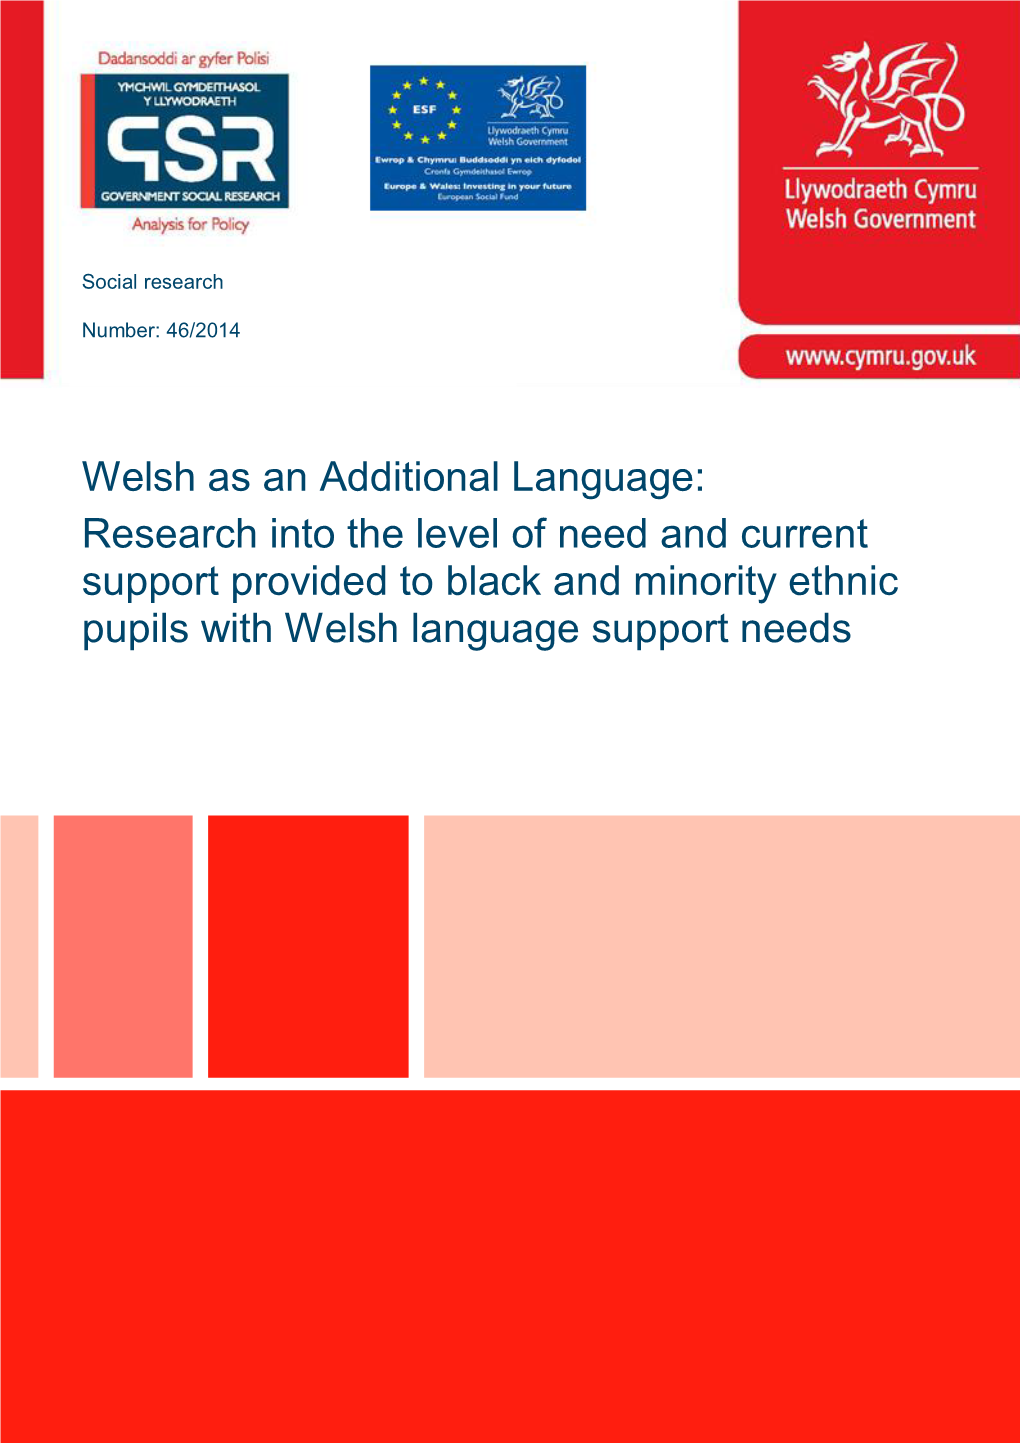 Welsh As an Additional Language: Research Into the Level of Need and Current Support Provided to Black and Minority Ethnic Pupils with Welsh Language Support Needs